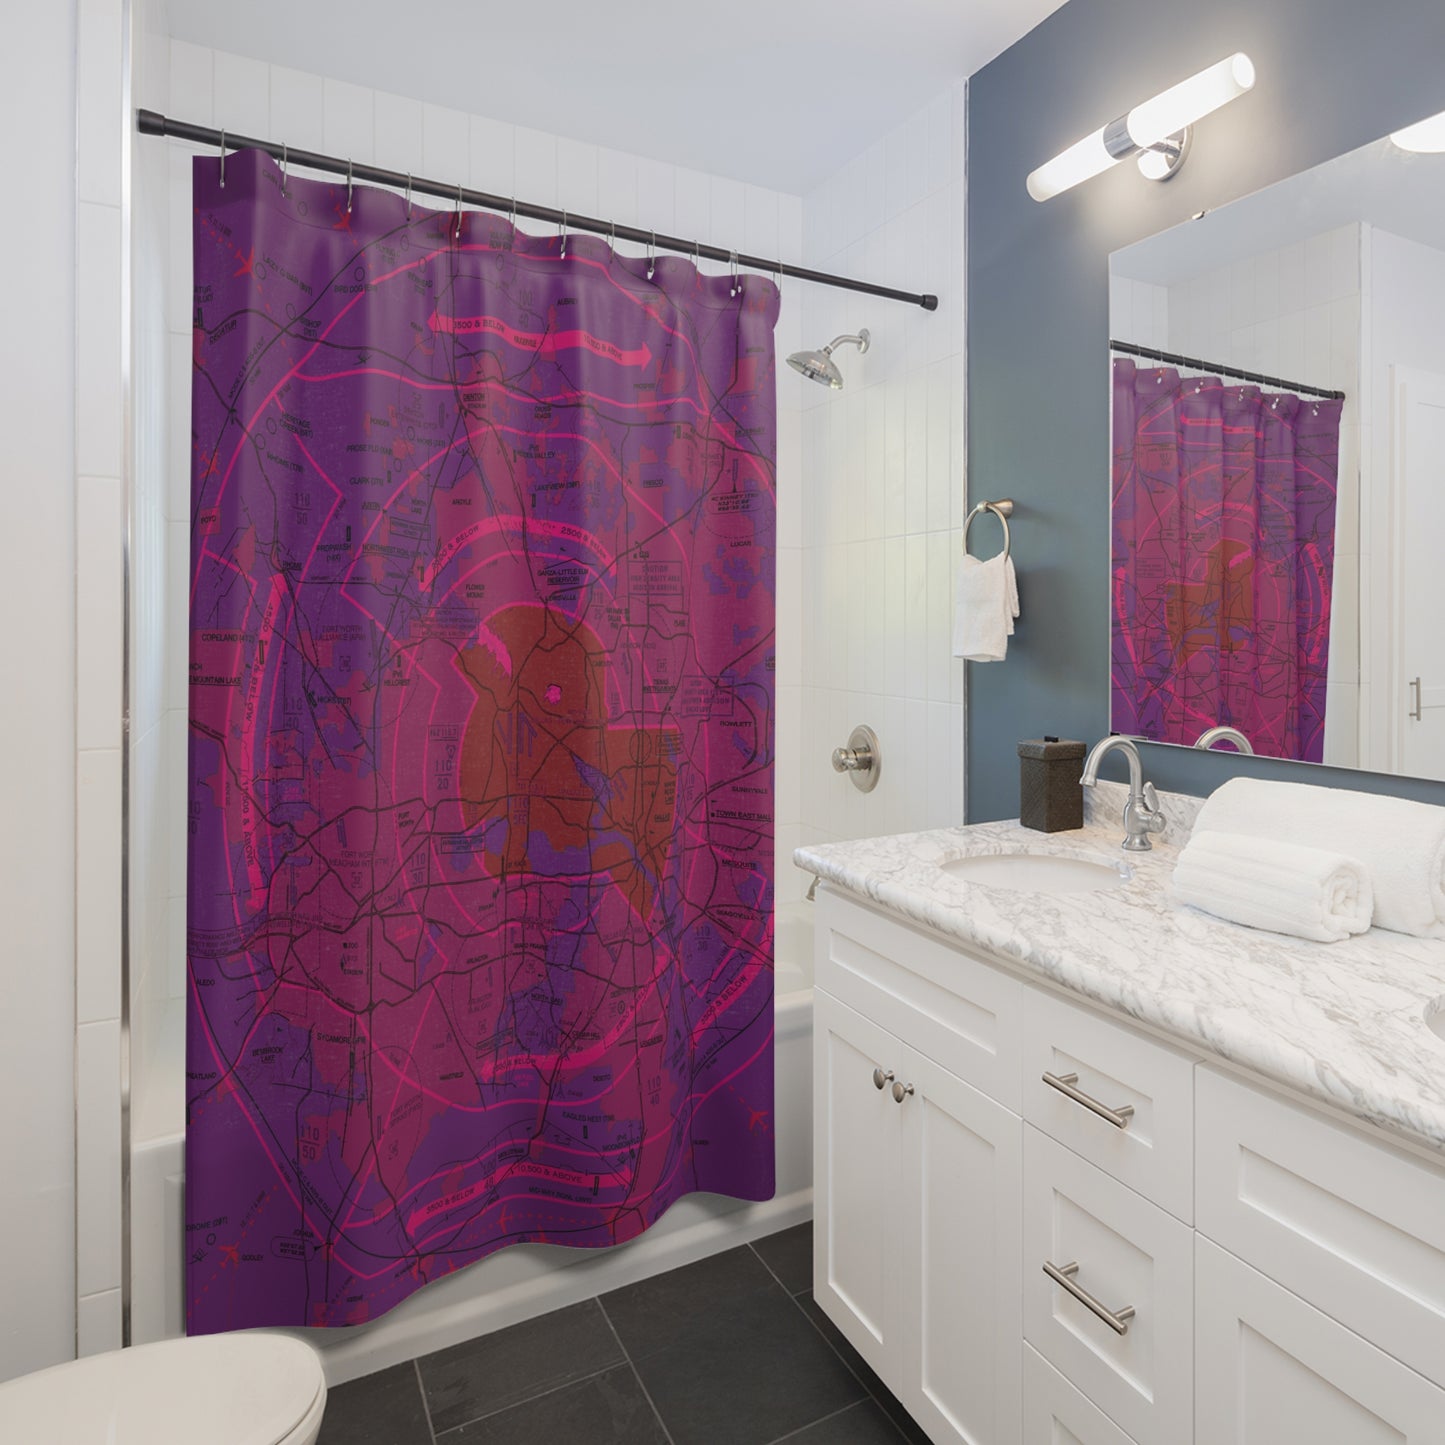 Dallas - Ft. Worth Flyway Chart Shower Curtains (purple)